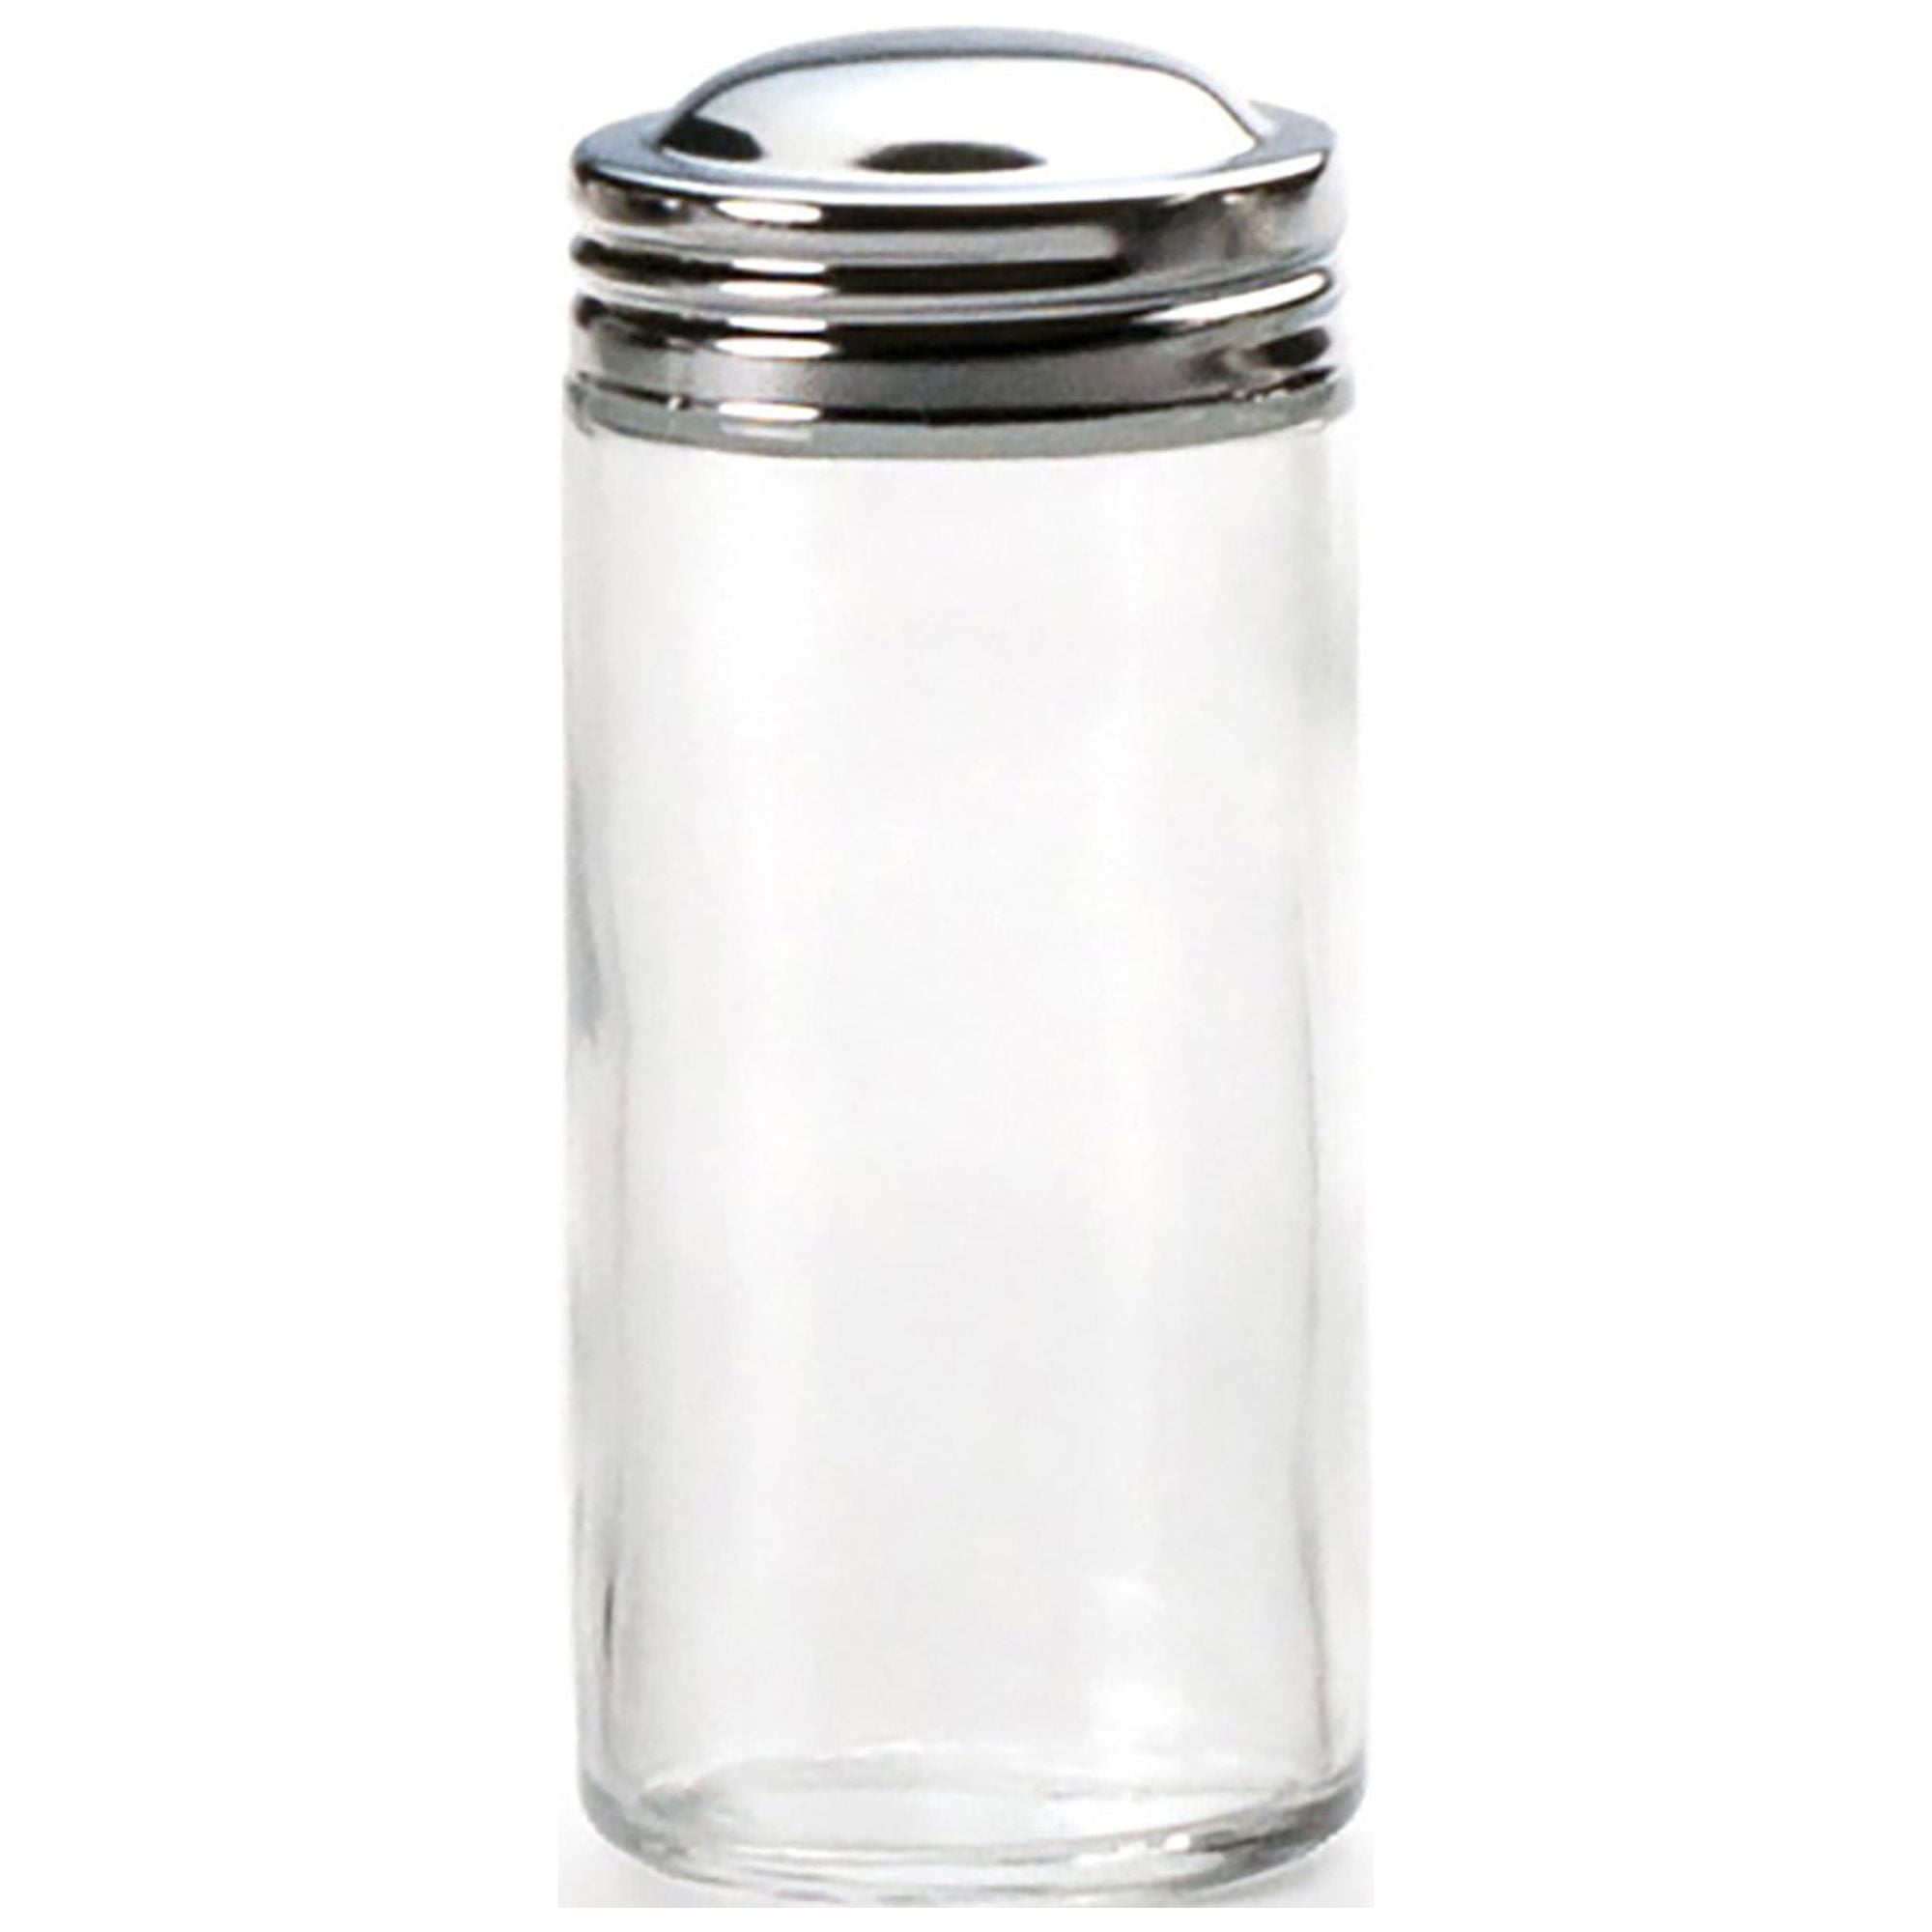 Riapawel Spice Jars with Lids and Spoons Clear Glass Canisters